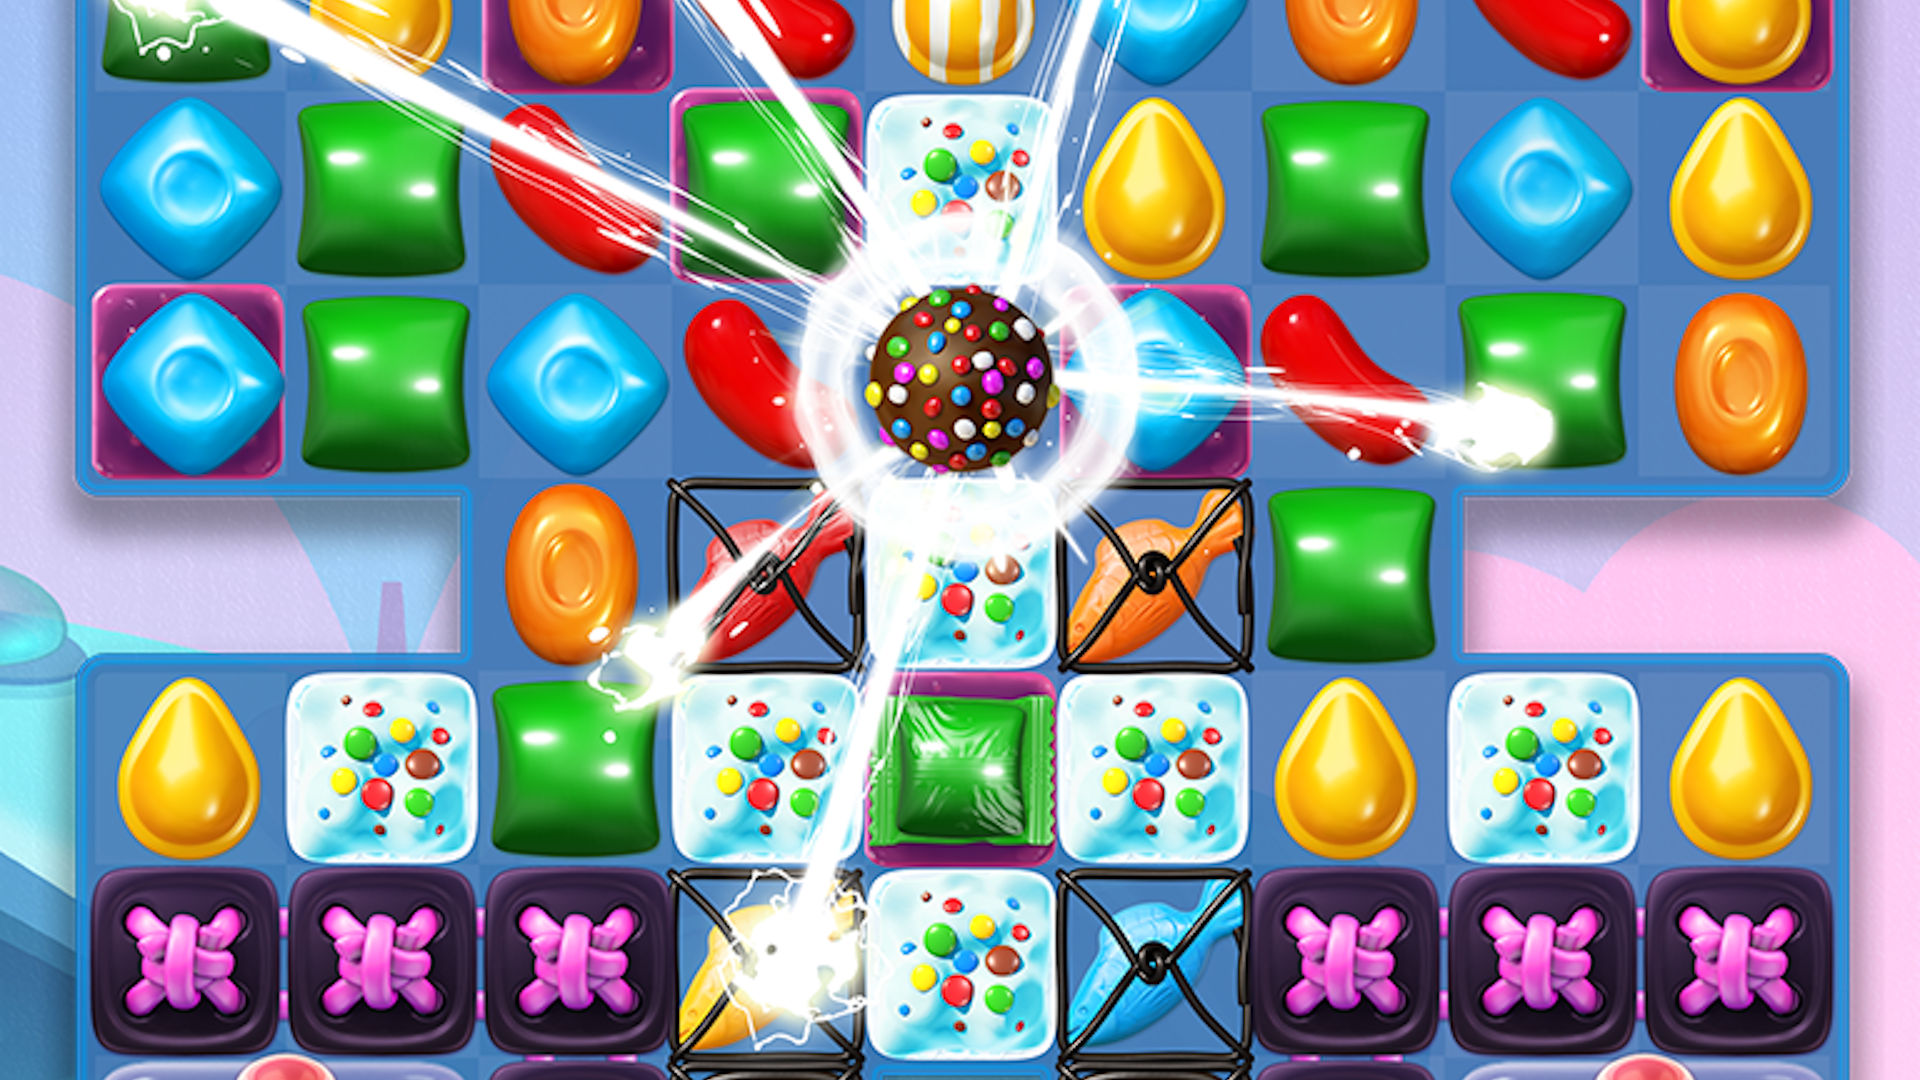 Best iOS games: Candy Crush Soda Saga. Image shows lots of sweet tiles together.